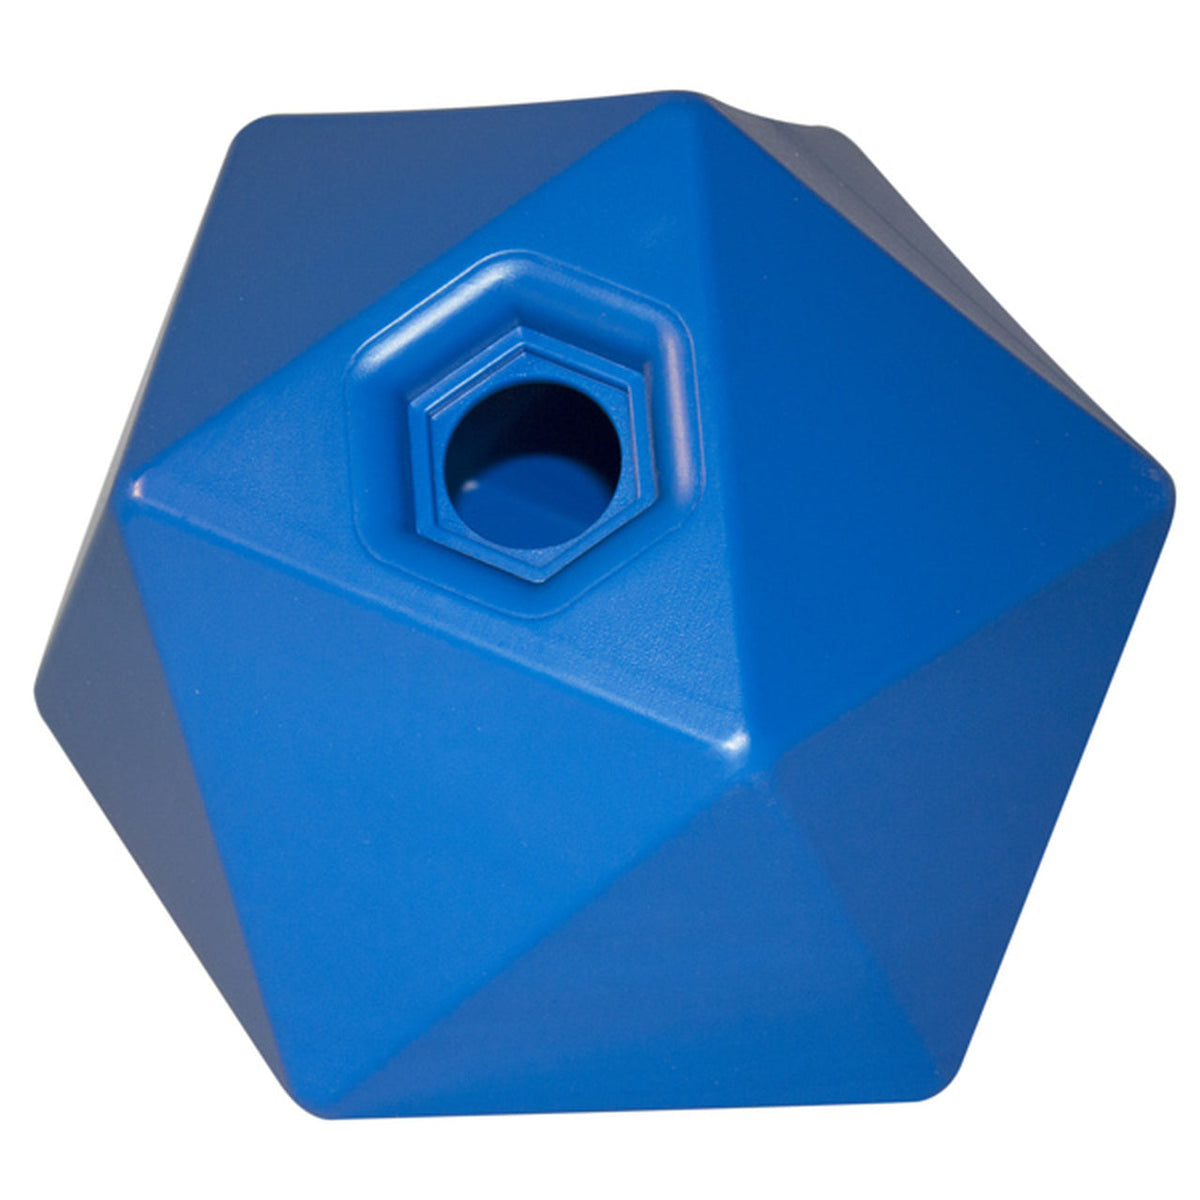 Blue treat ball with numerous flat sides and a small treat opening.